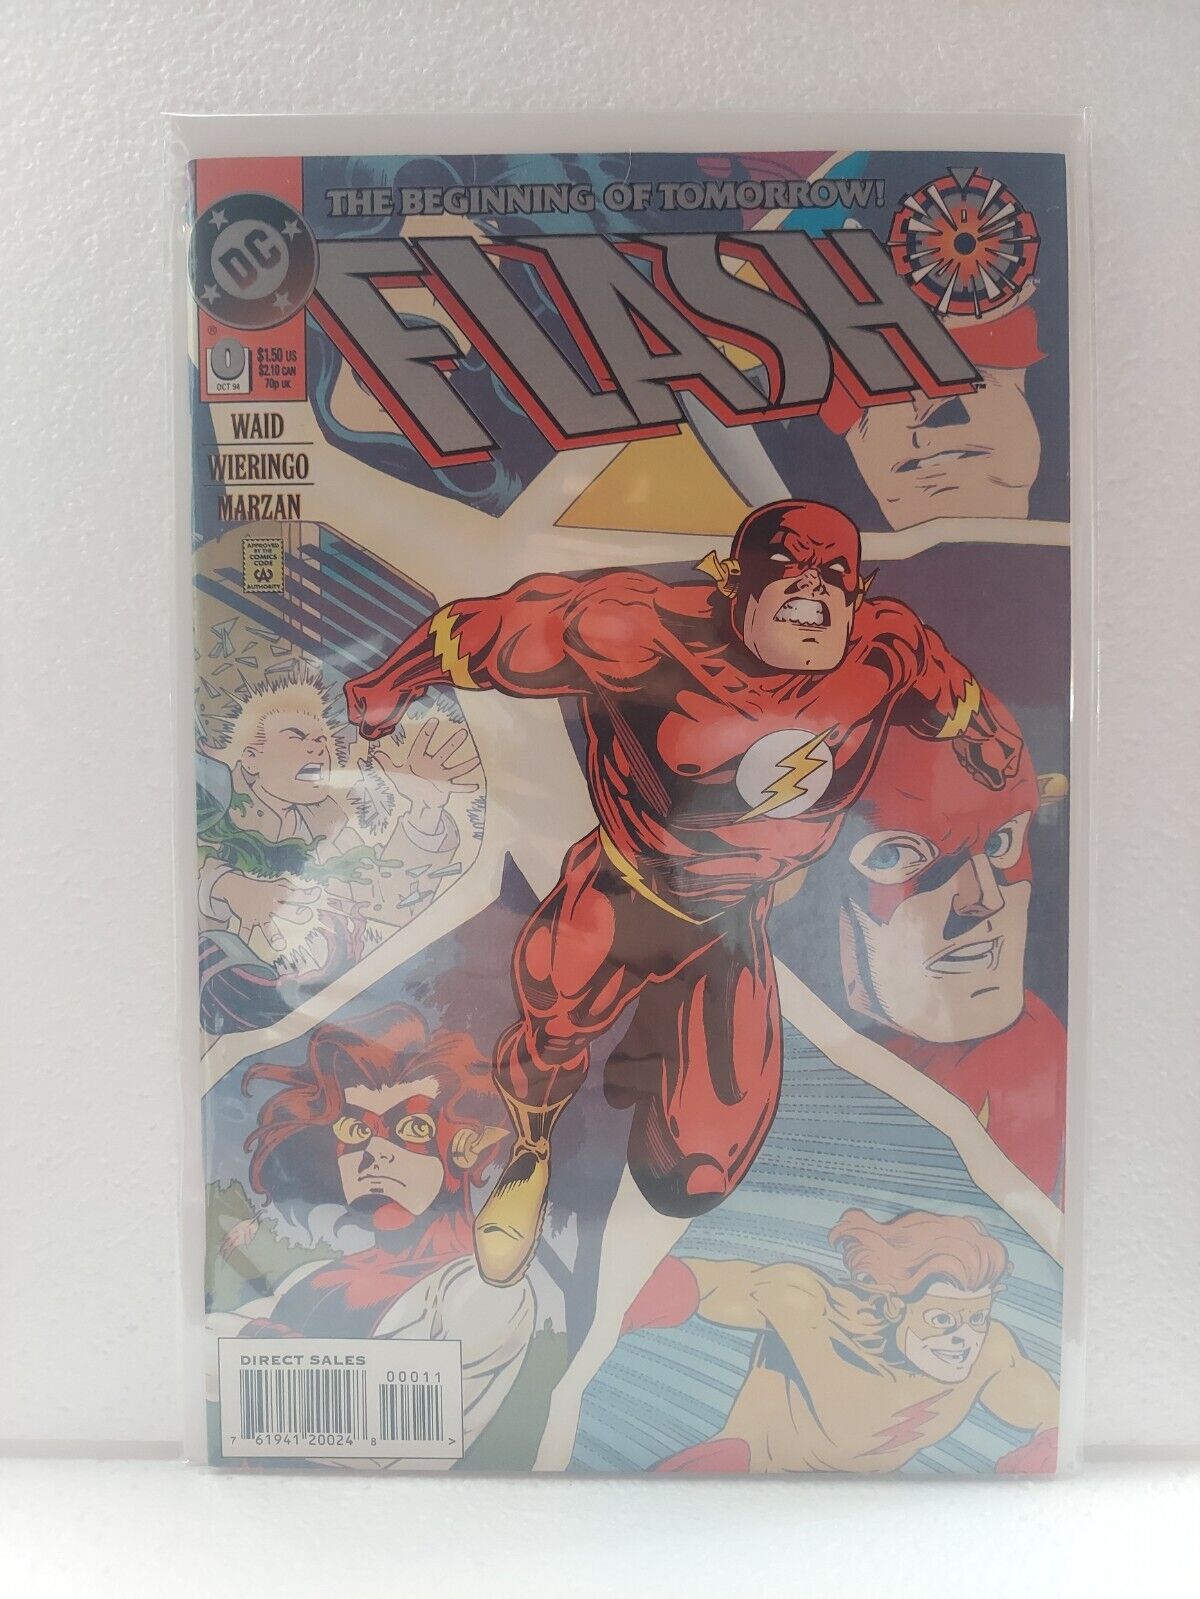 YOU PICK THE ISSUE - THE FLASH VOL. 2 - DC - ISSUE 0 - 230 + ANNUALS